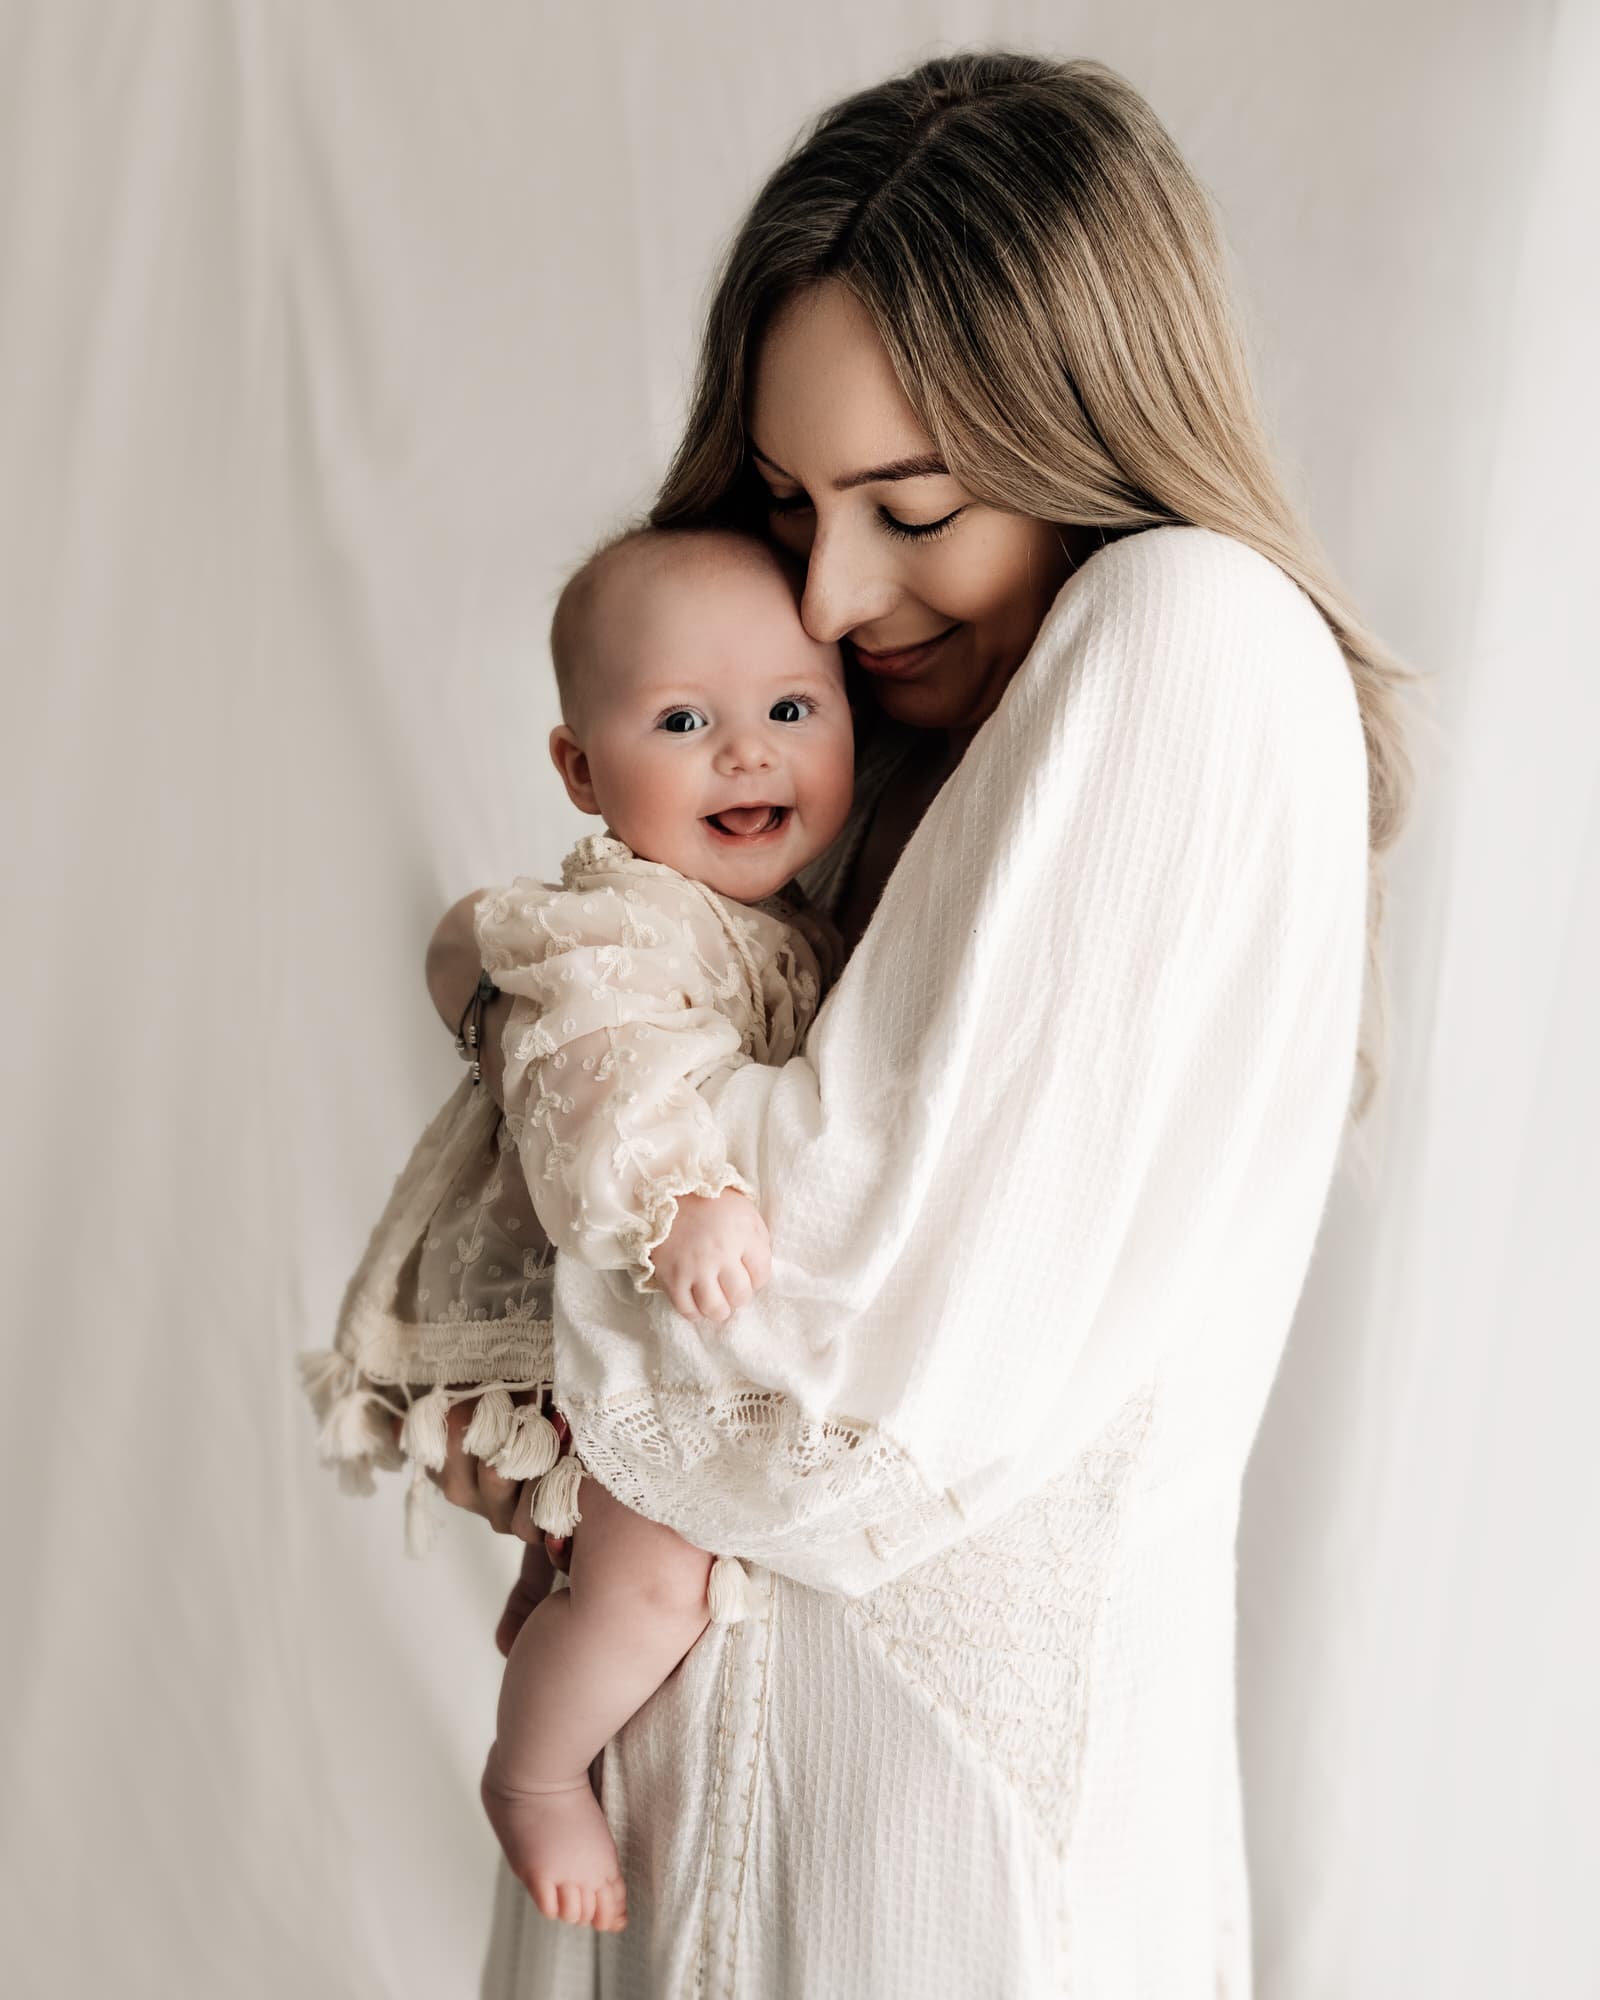 mother holding her baby and baby smiling during a photoshoot in a leeds photography studio